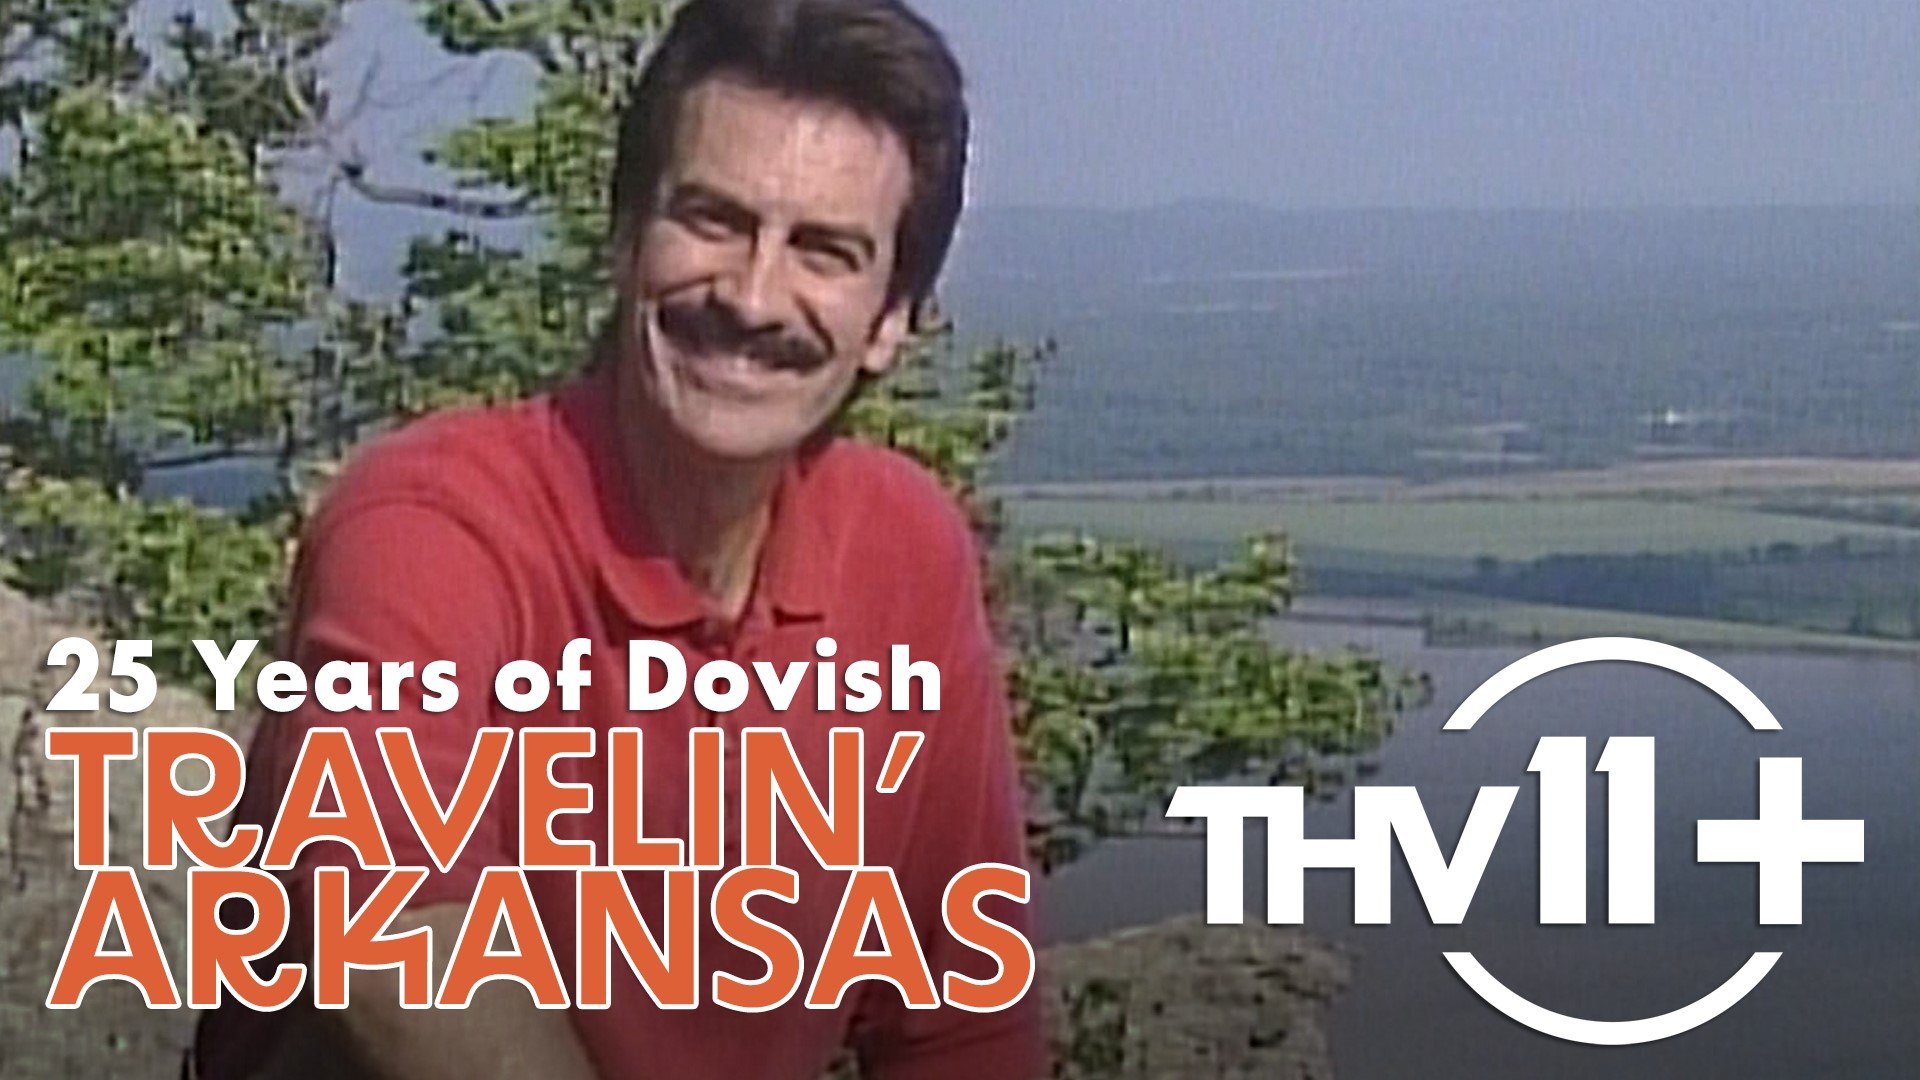 For 25 years, Chuck Dovish made Travelin' Arkansas for THV11. Enjoy this special from 2001, featuring the greatest sights and sounds of the Natural State.